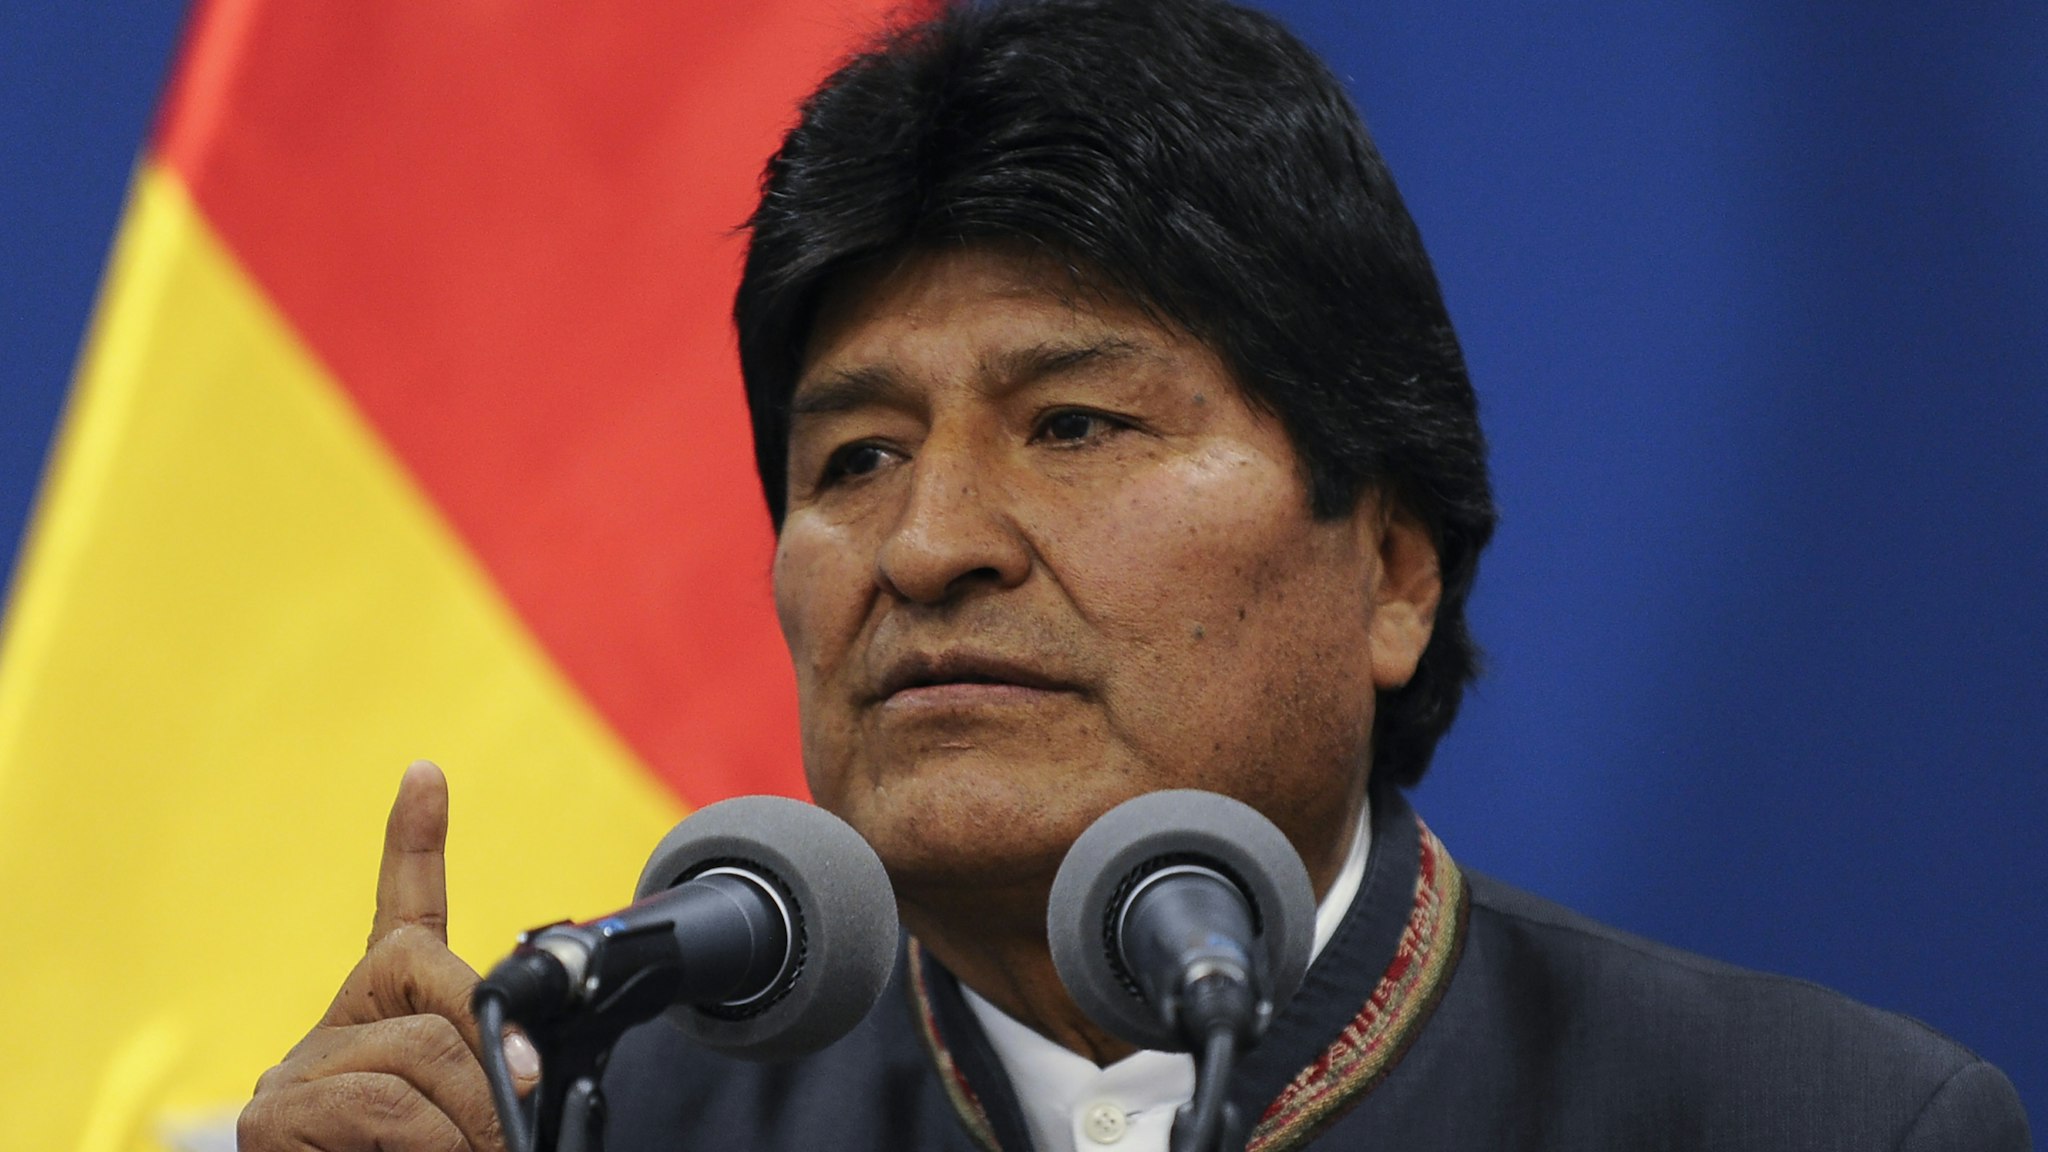 Bolivia's President Evo Morales delivers a press conference in La Paz on October 31, 2019. - A technical mission from the Organization of American States (OAS) began on Thursday its audit of the disputed Bolivian presidential election that delivered Evo Morales a fourth term but sparked deadly riots. (Photo by JORGE BERNAL / AFP) (Photo by JORGE BERNAL/AFP via Getty Images)